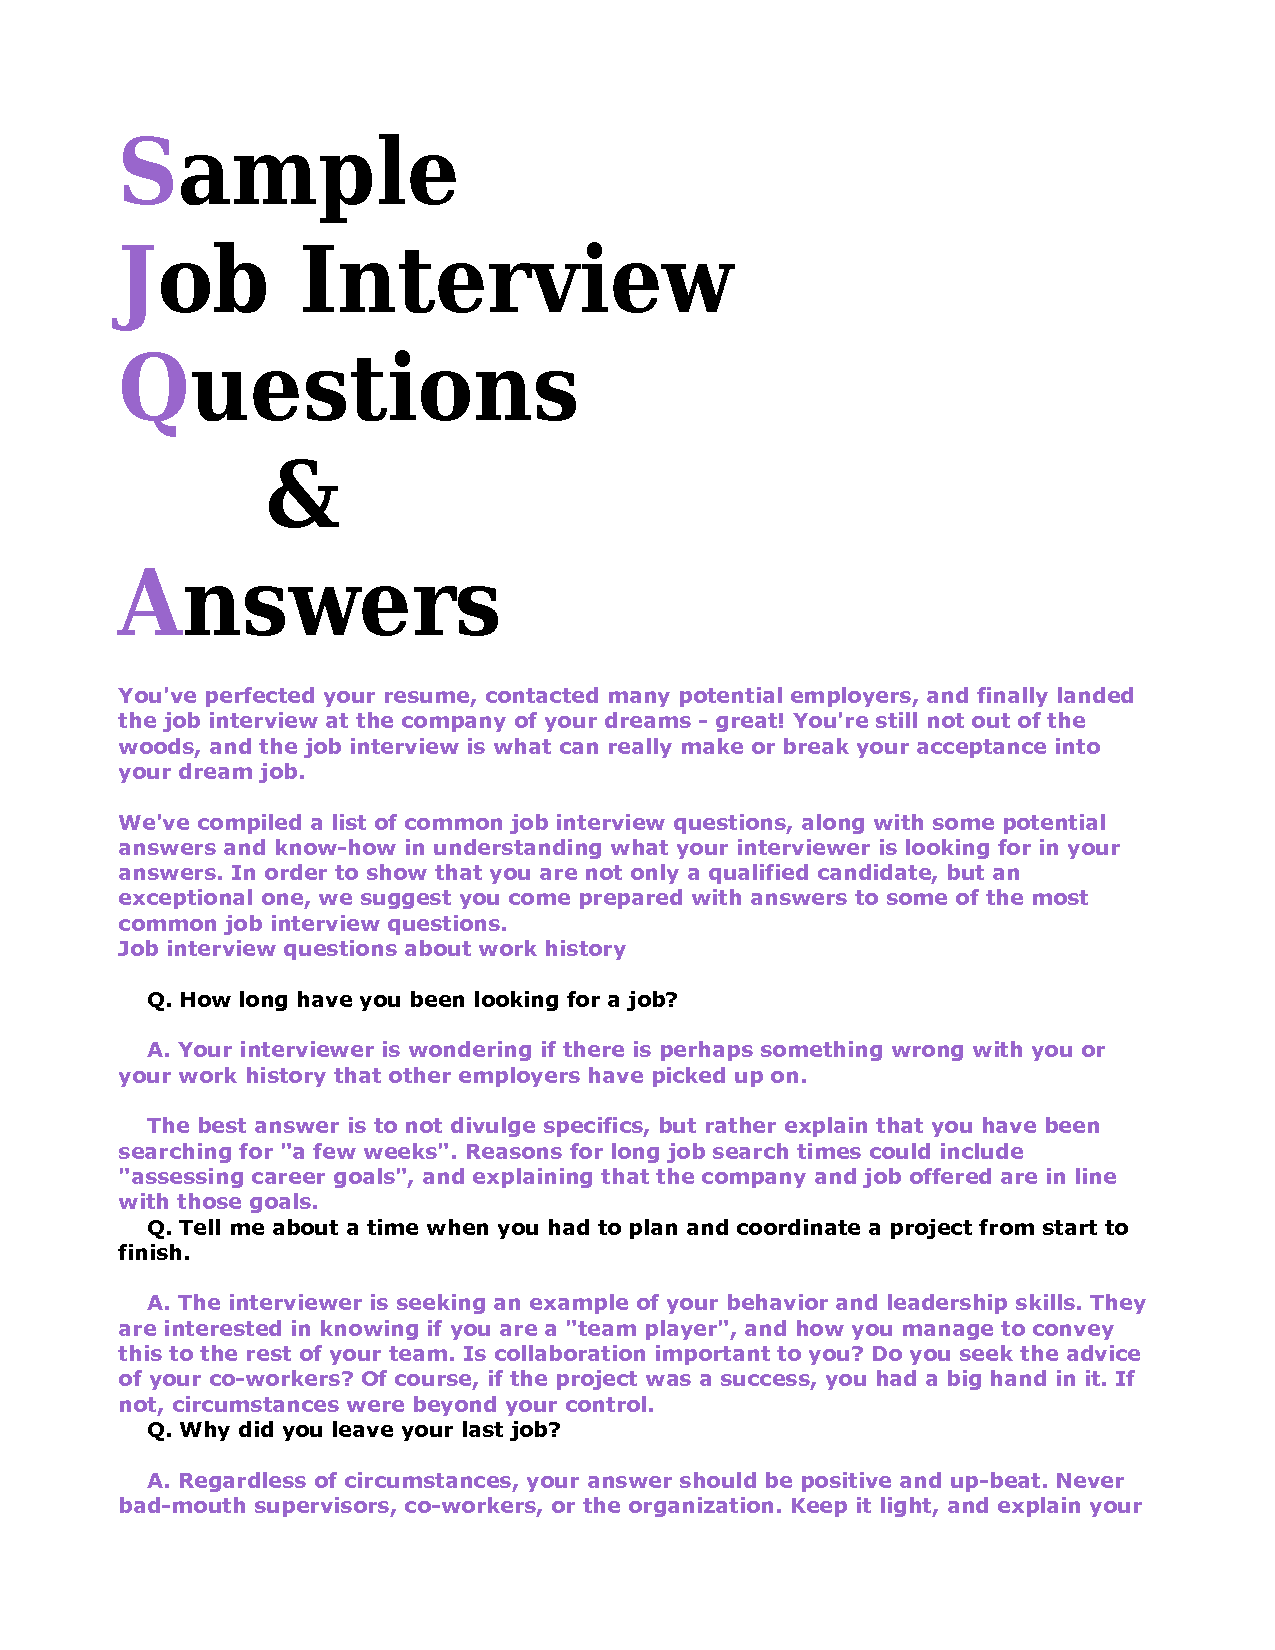 How to Answer Job Interview Questions - Security Guards Companies